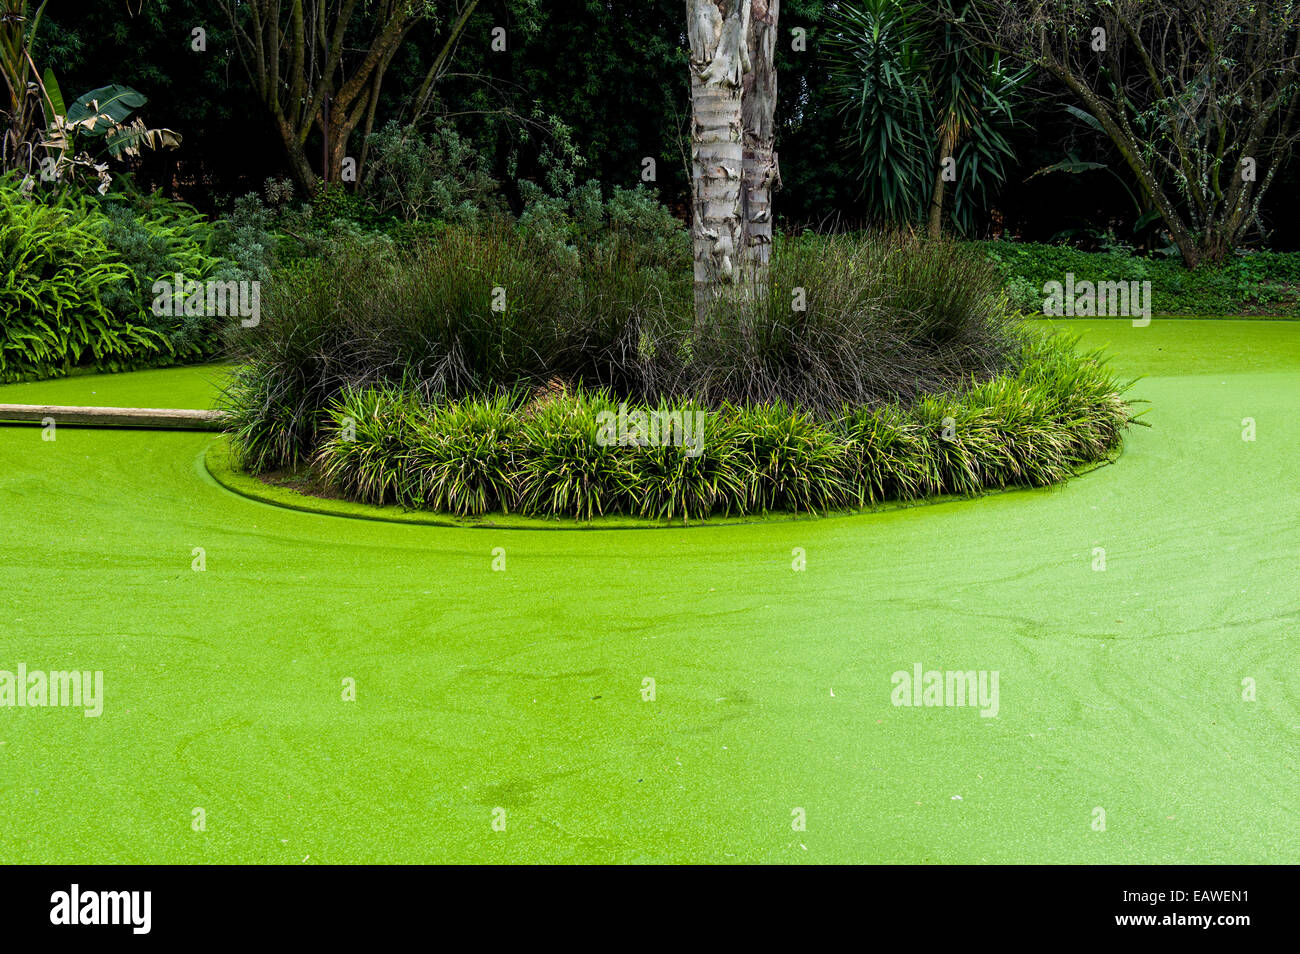 Aquatic plants and algae cover the water surface of a garden pond. Stock Photo